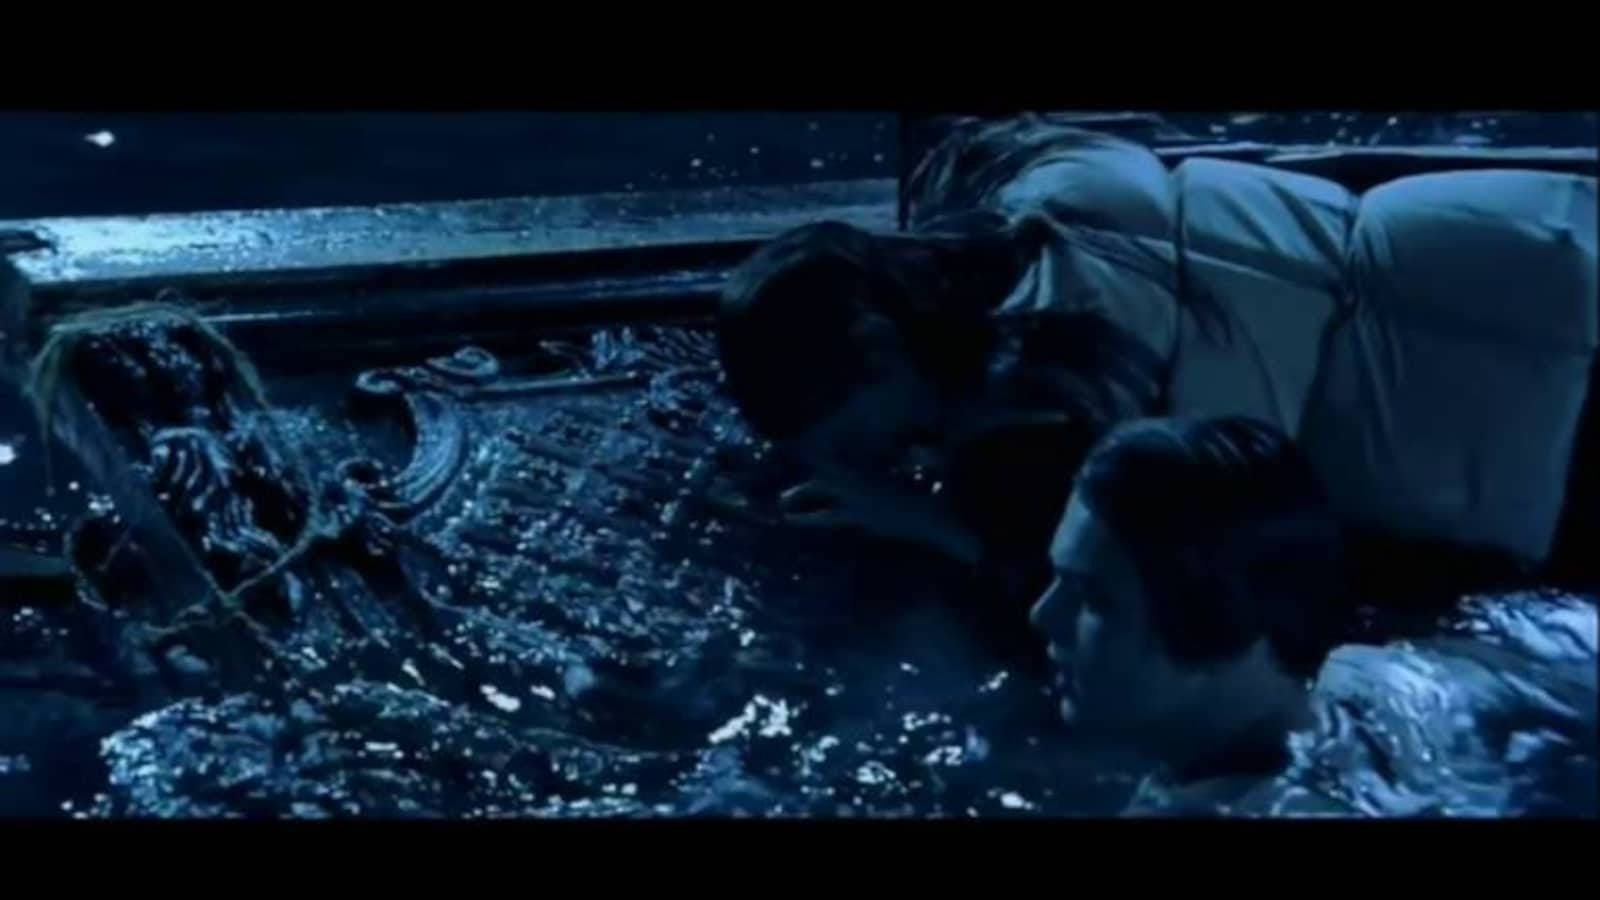 Jack and Rose Weren't on a Door in Titanic and It Would Have Sunk